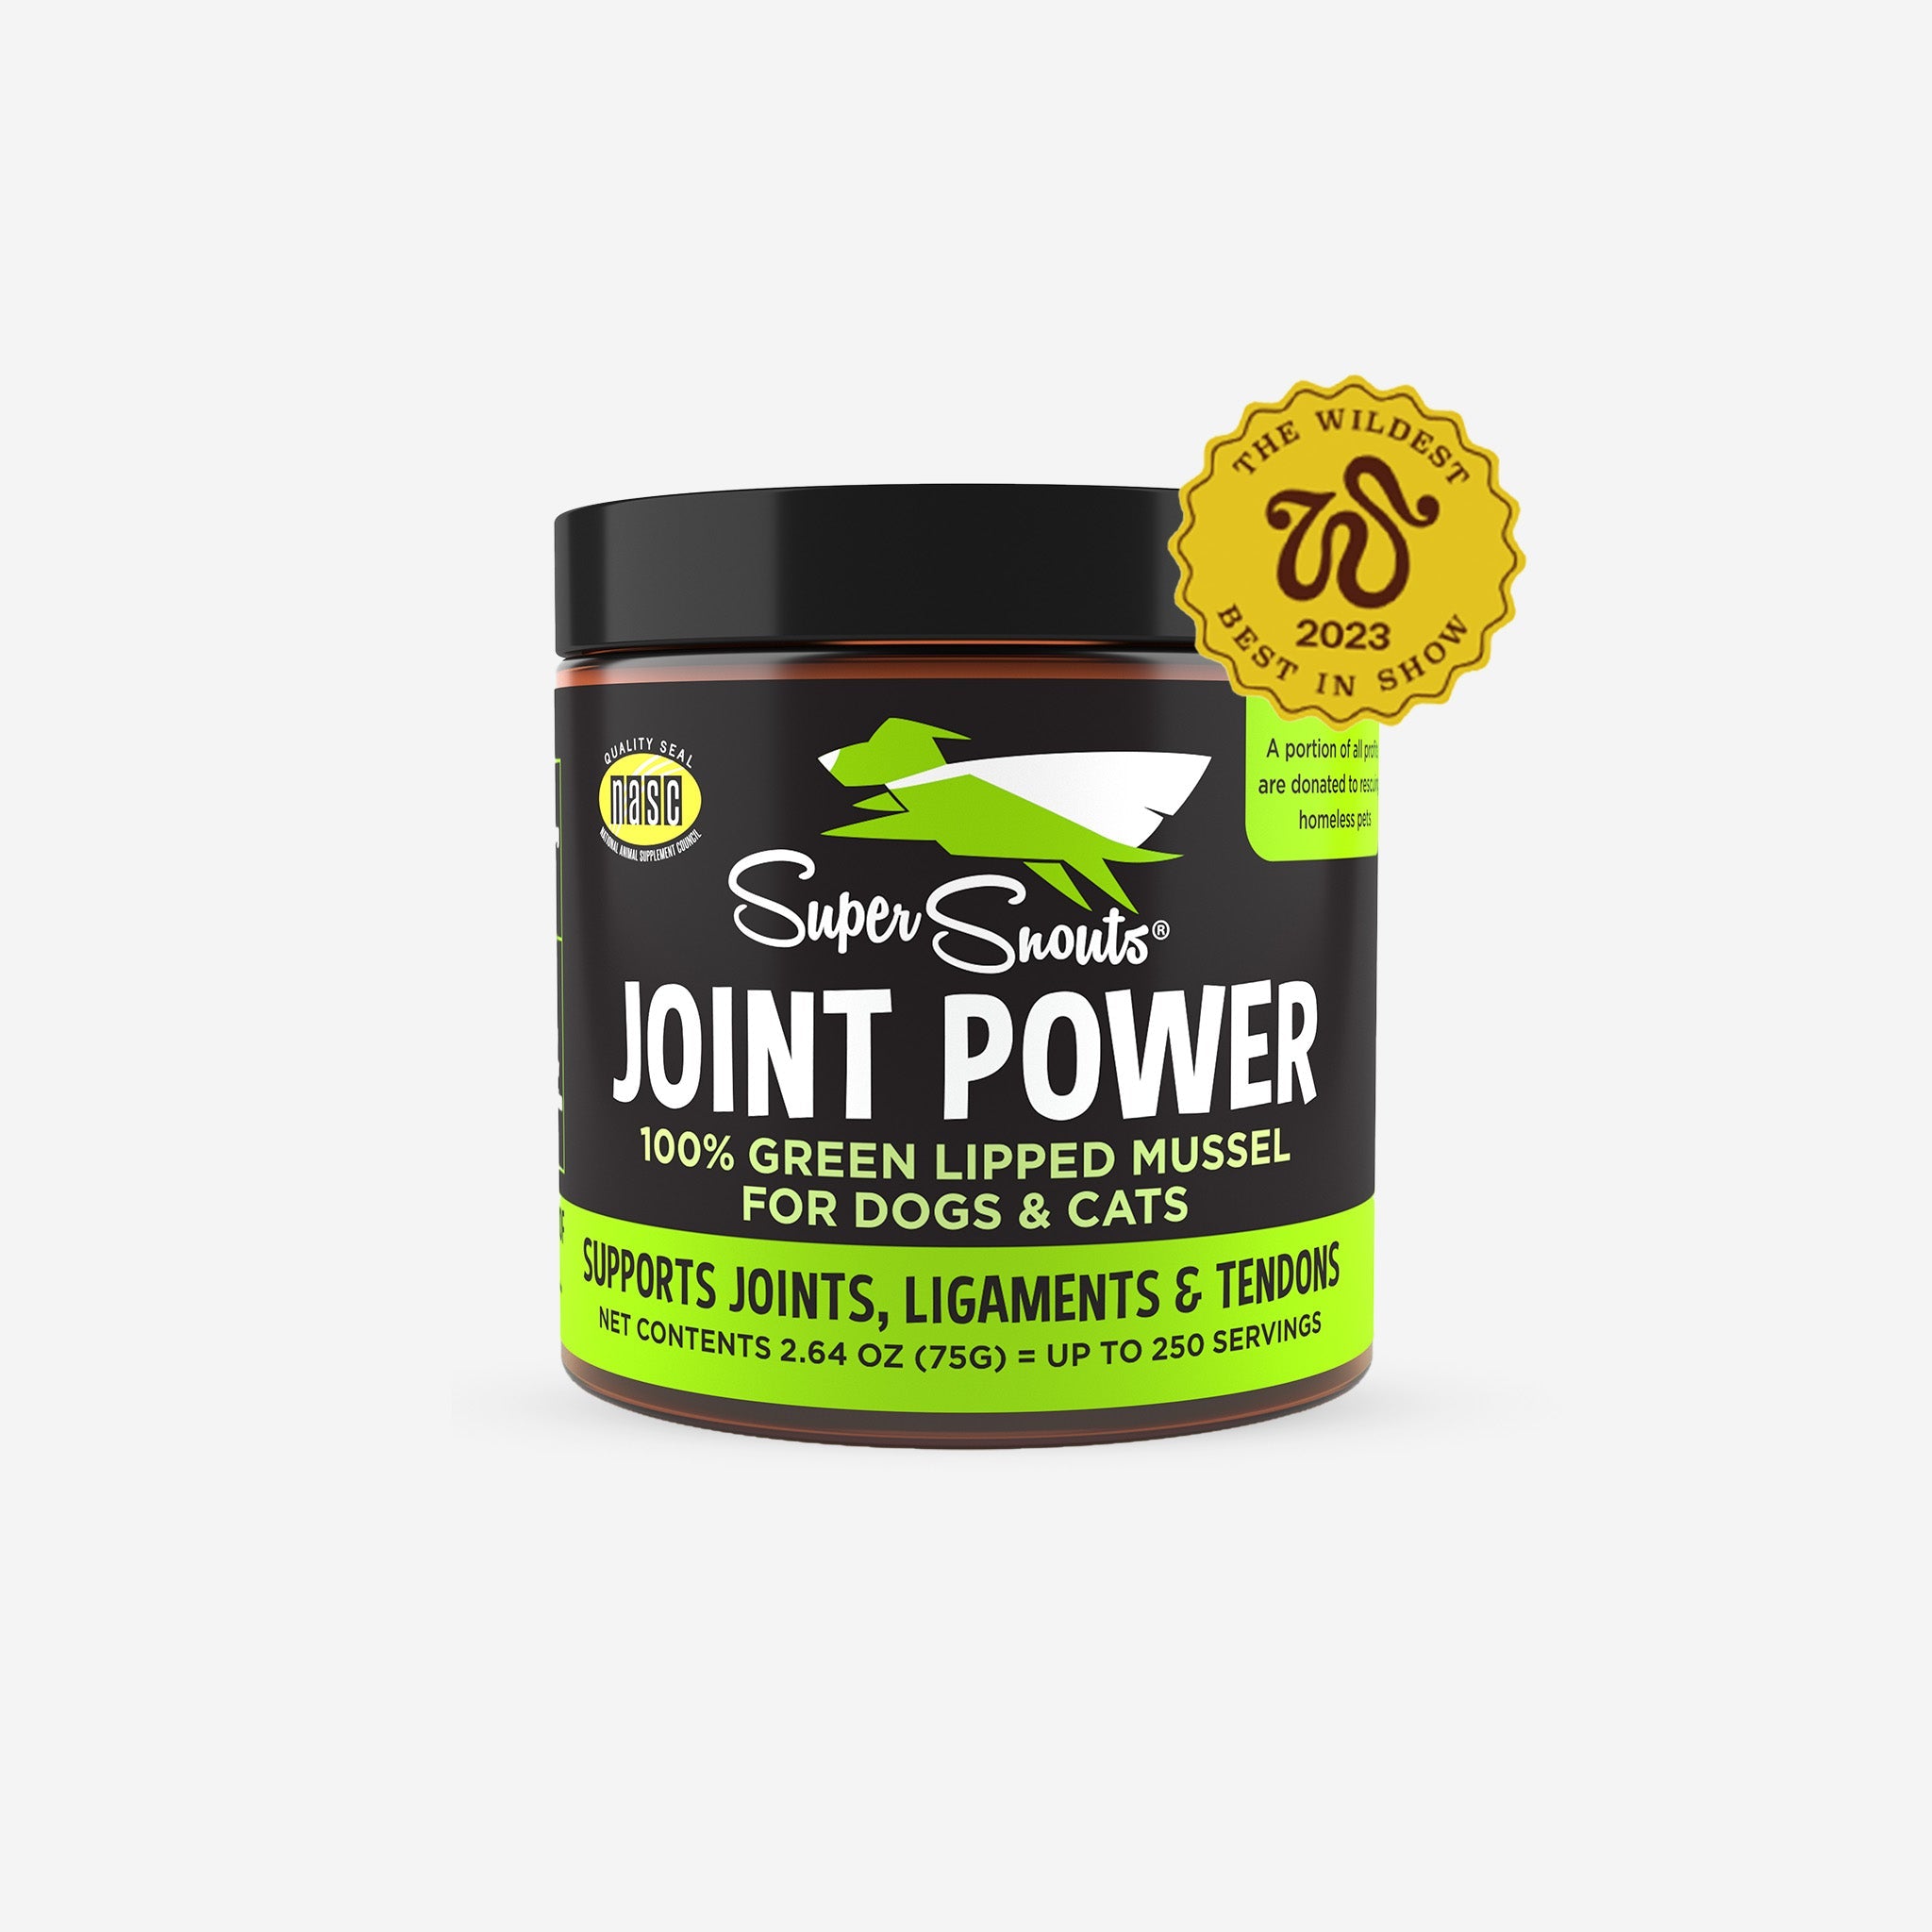 Super Snouts Joint Power 100% Green Lipped Mussel Supplement for Dogs & Cats